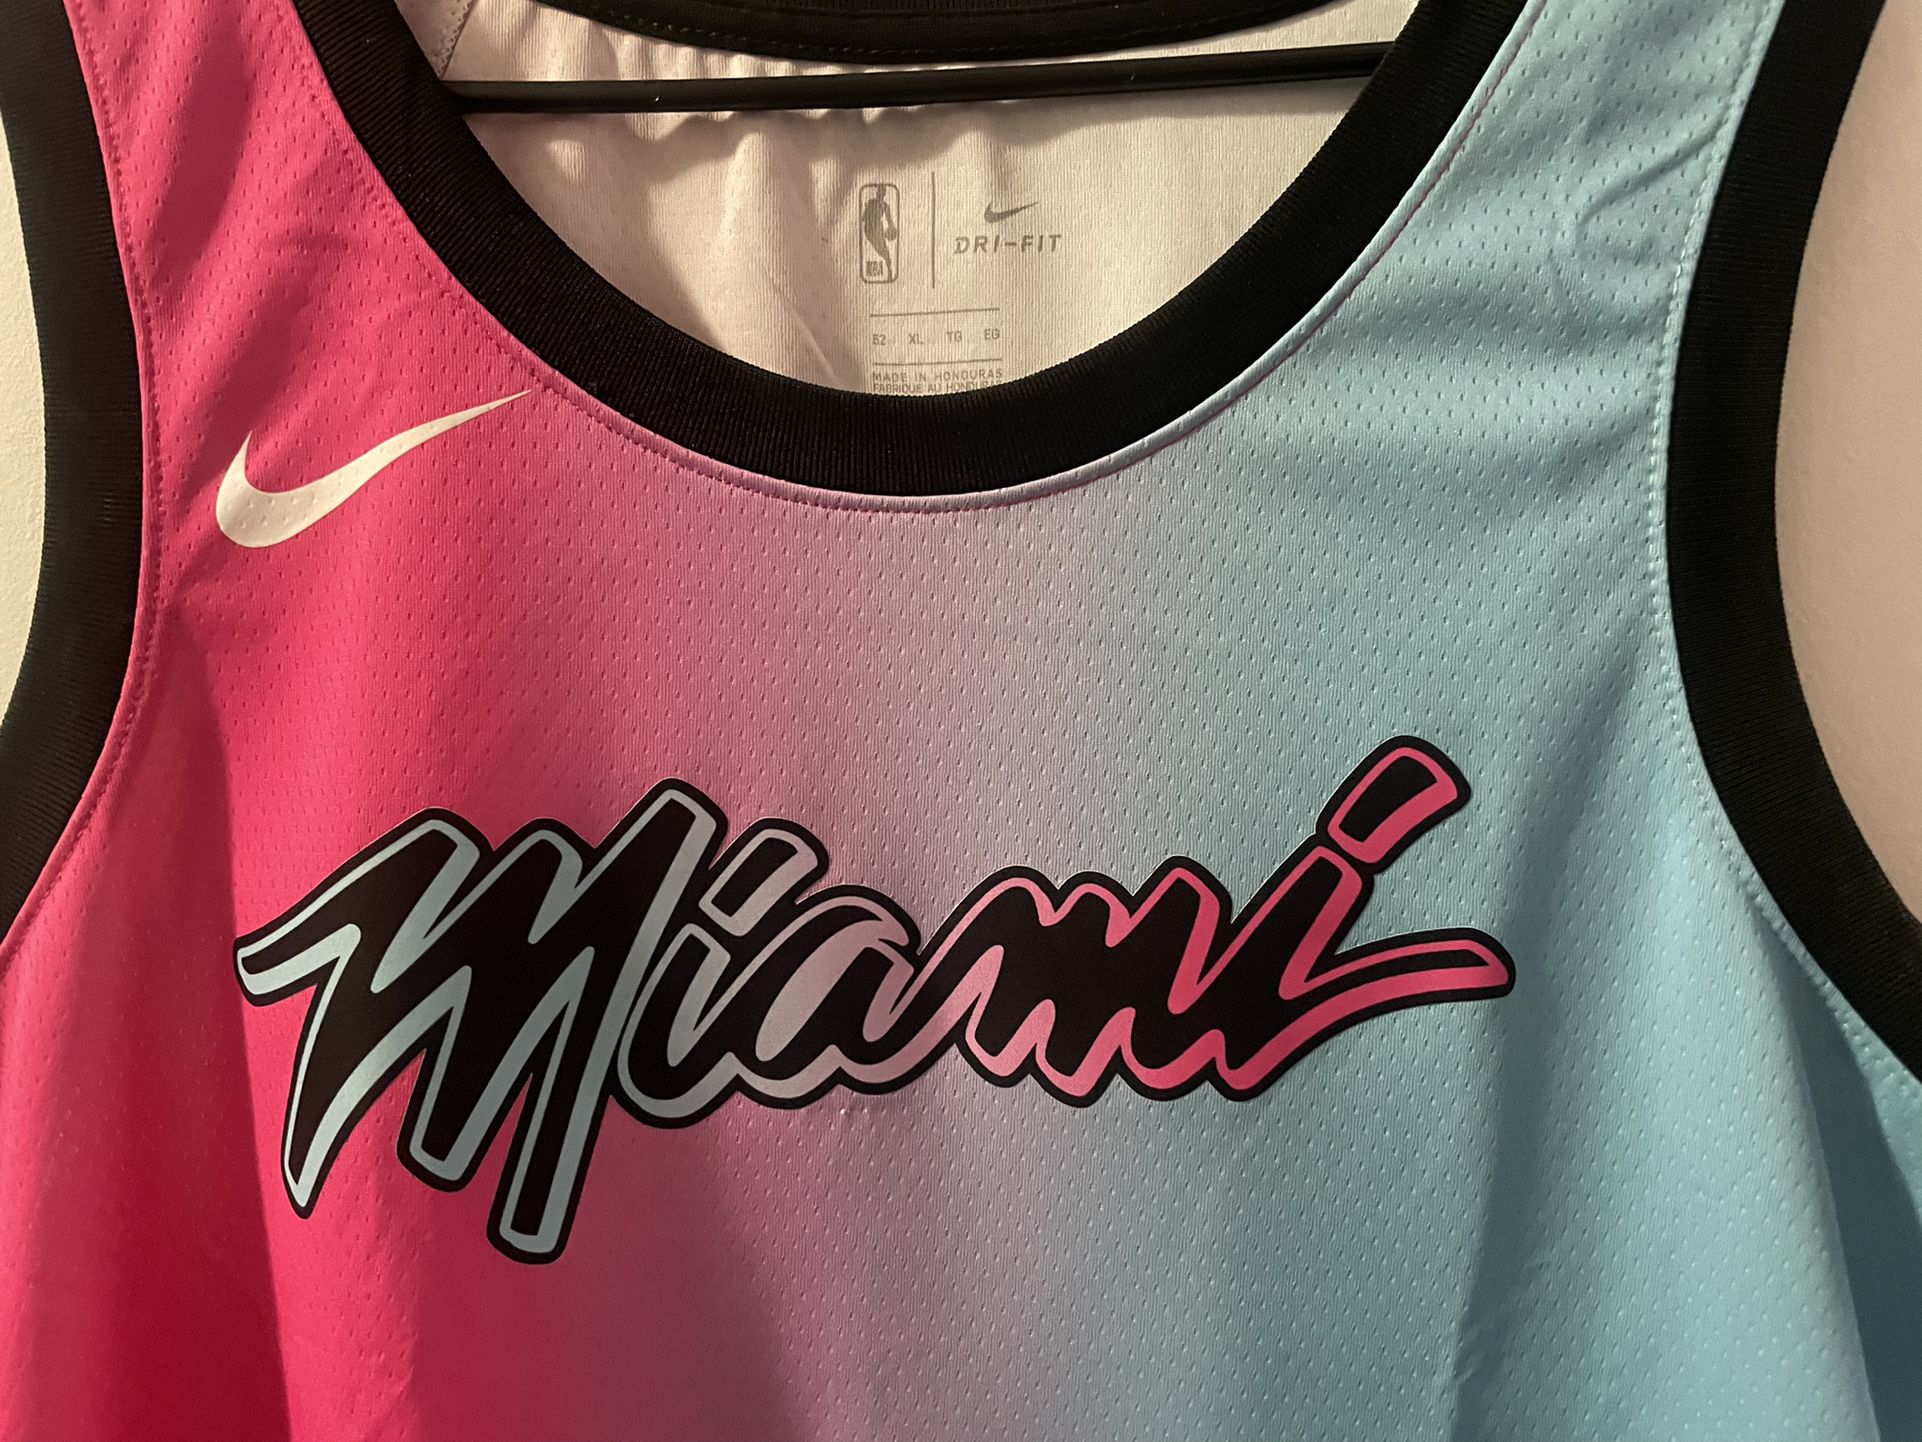 Miami Heat Vice City Edition Shirt for Sale in Cooper City, FL - OfferUp